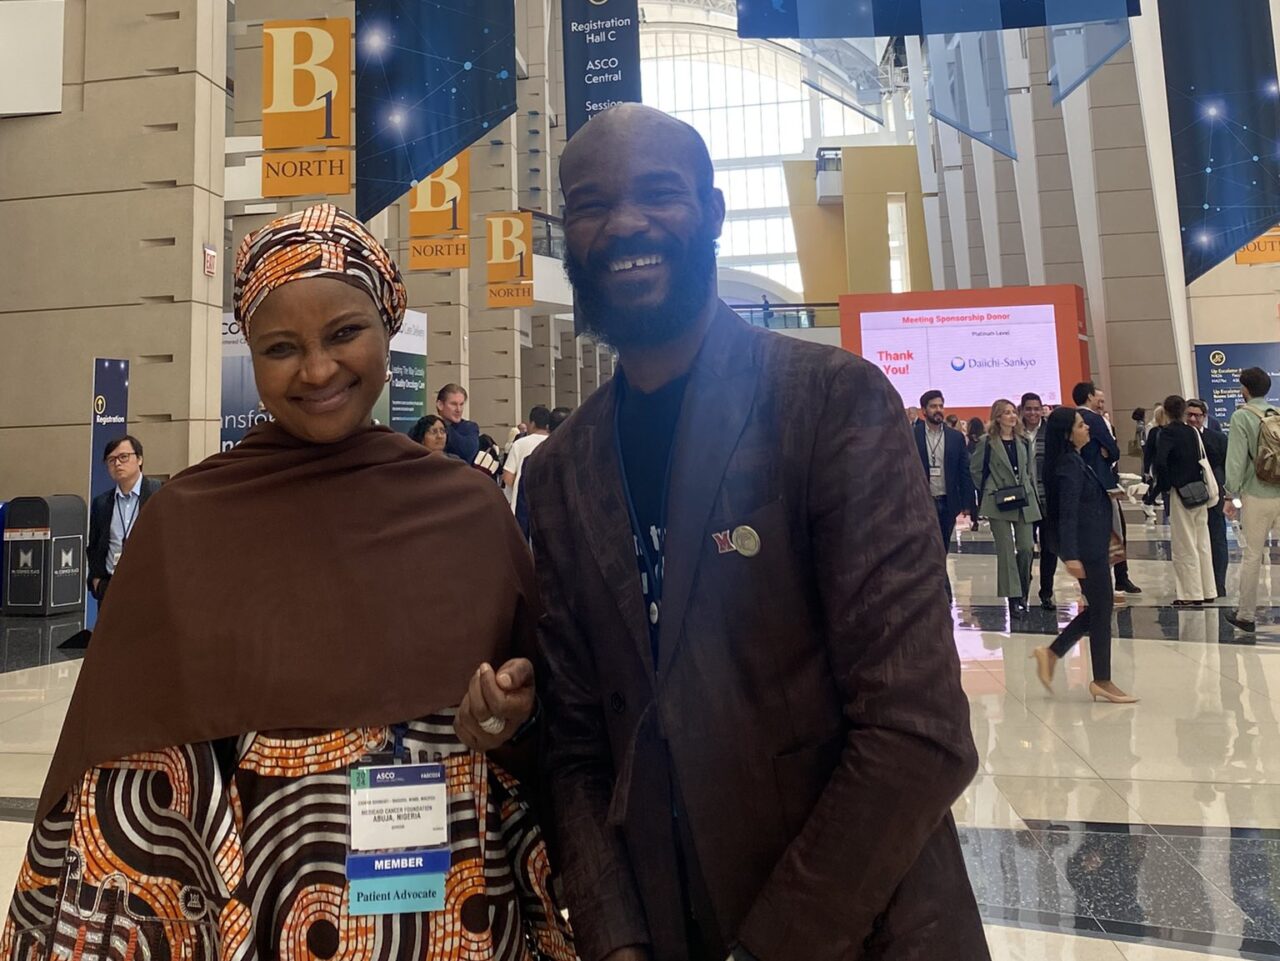 Runcie Chidebe: A quick picture with Zainab Shinkafi-Bagudu before she heads to her busy schedules at ASCO24